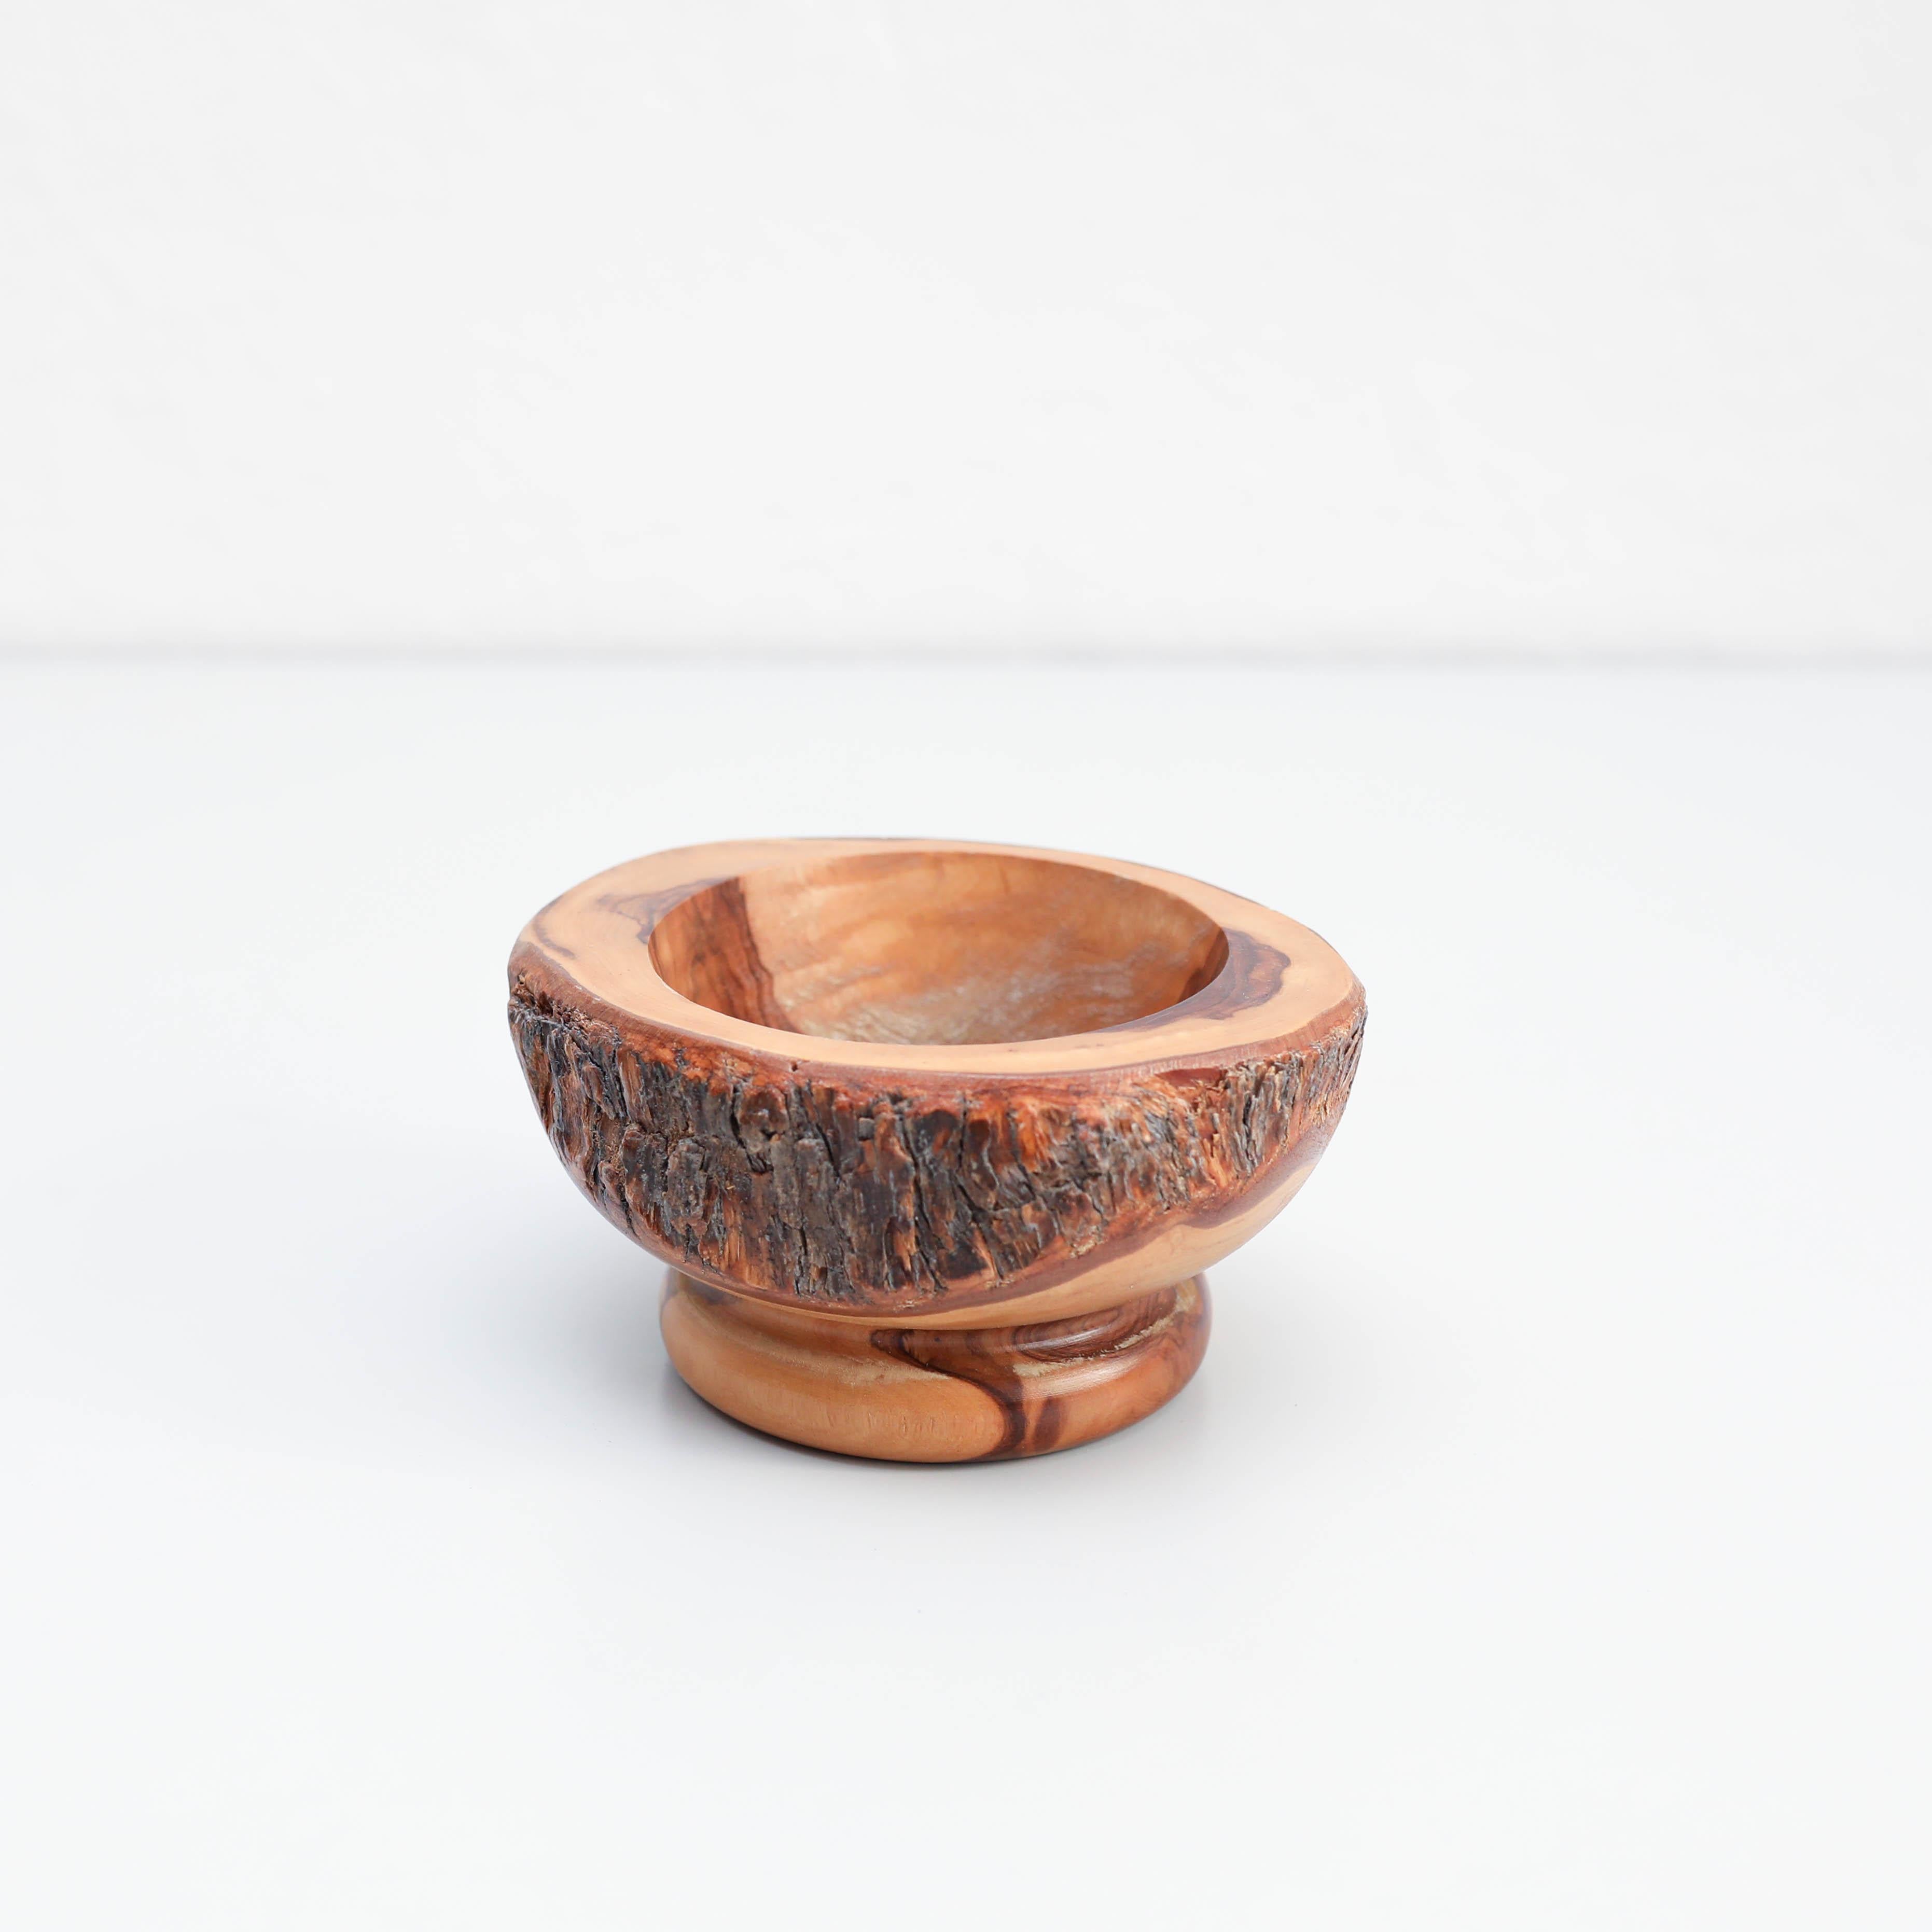 Antique vintage wood mortar.

Made by unknown manufacturer in Spain circa 1970.

In original condition, with minor wear consistent with age and use, preserving a beautiful patina.

Materials:
wood.
 